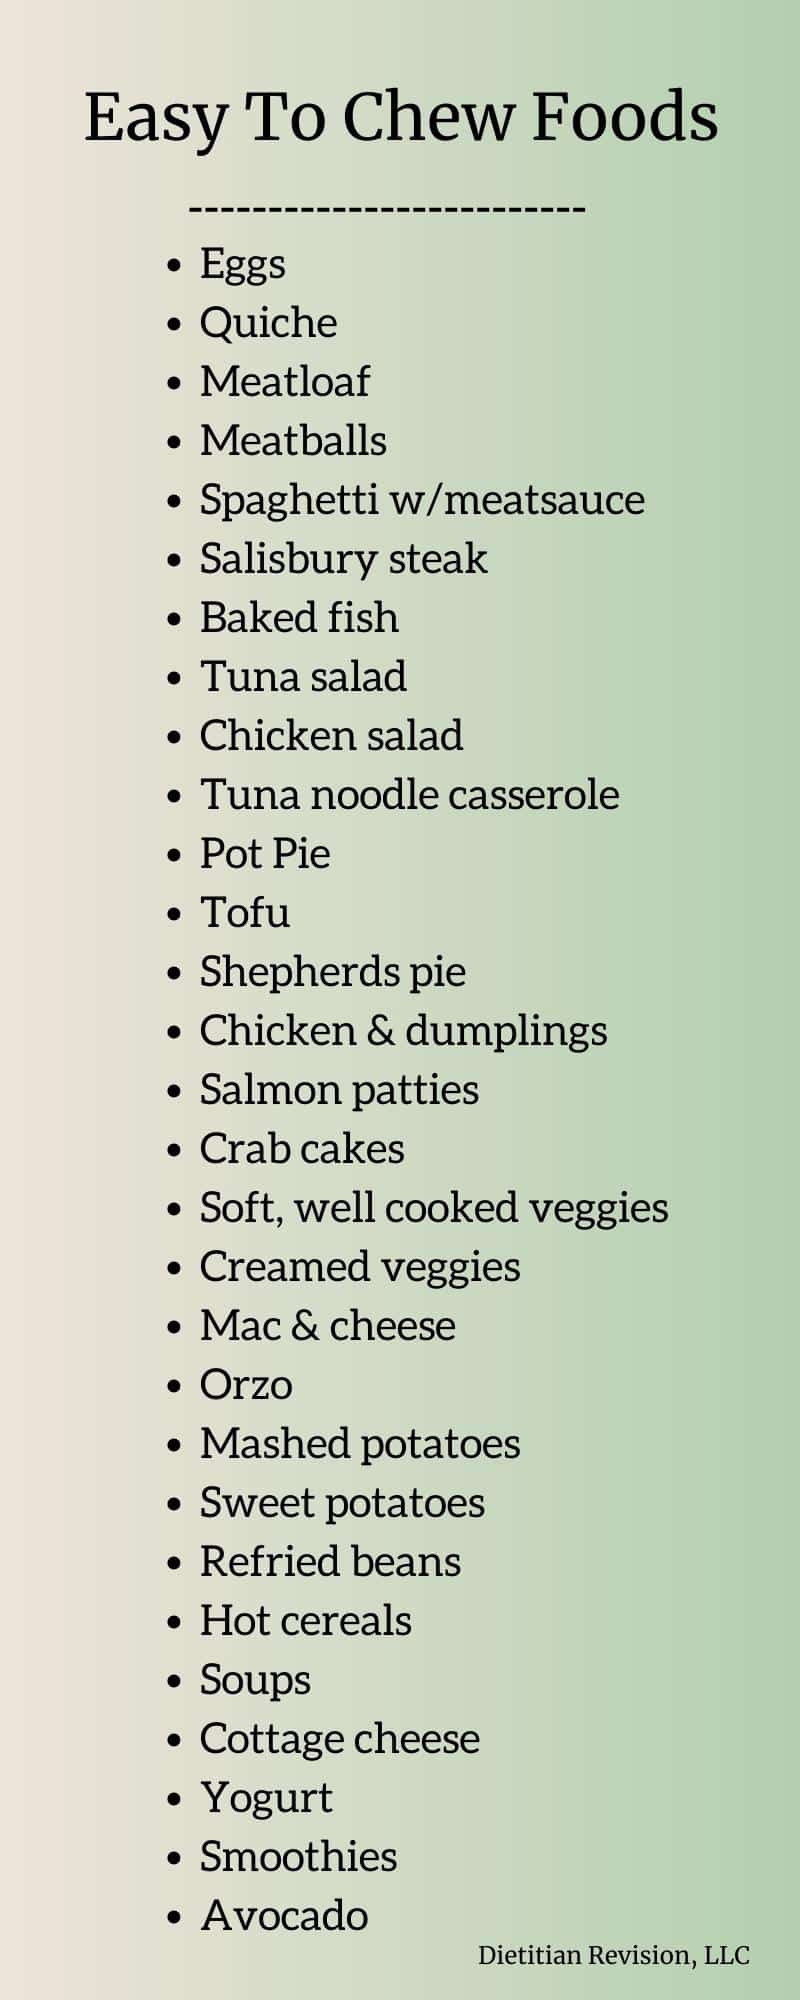 List of easy to chew foods: eggs, quiche, meatloaf, meatballs, spaghetti, salisbury steak, baked fish, tuna salad, chicken salad, tuna noodle casserole, pot pie, tofu, shepherds pie, chicken & dumplings, salmon patties, crab cakes, soft well cooked veggies, creamed veggies, mac & cheese, orzo, mashed potatoes, sweet potatoes, refried beans, hot cereals, soups, cottage cheese, yogurt, smoothies, avocado. 